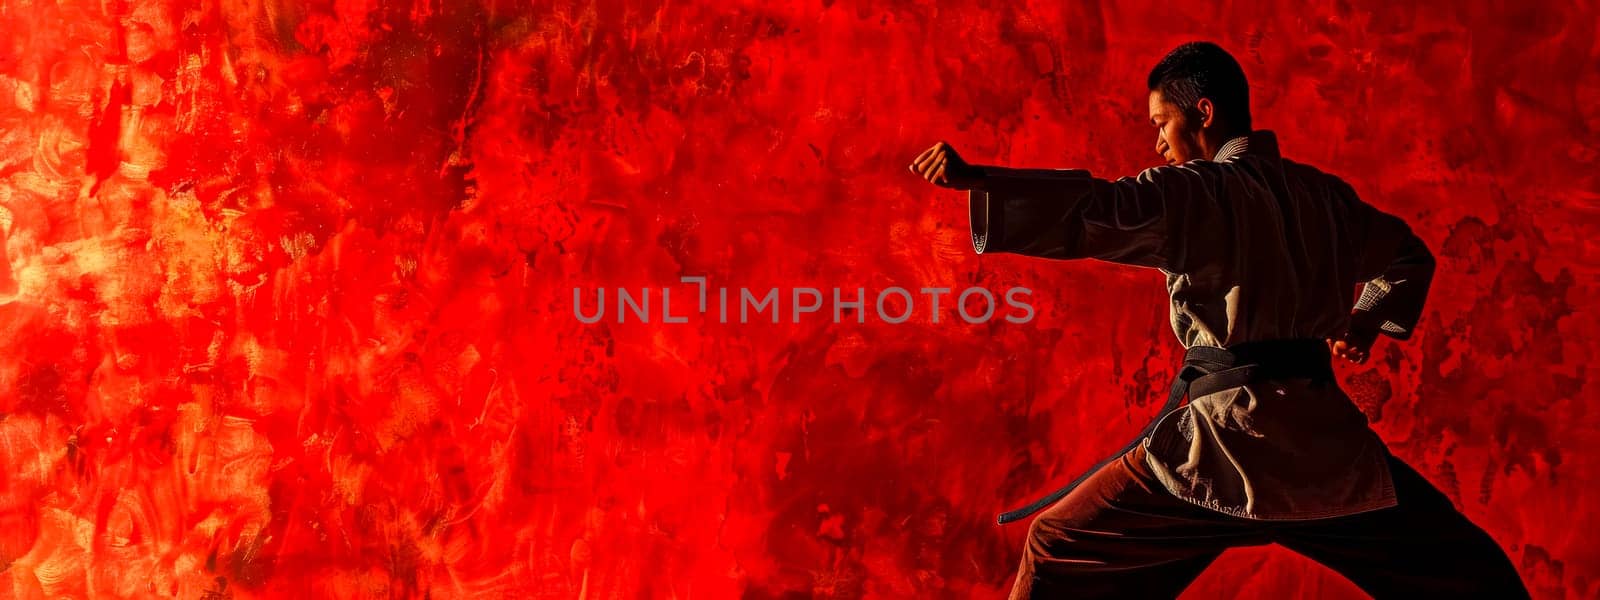 Martial artist in action against fiery background by Edophoto